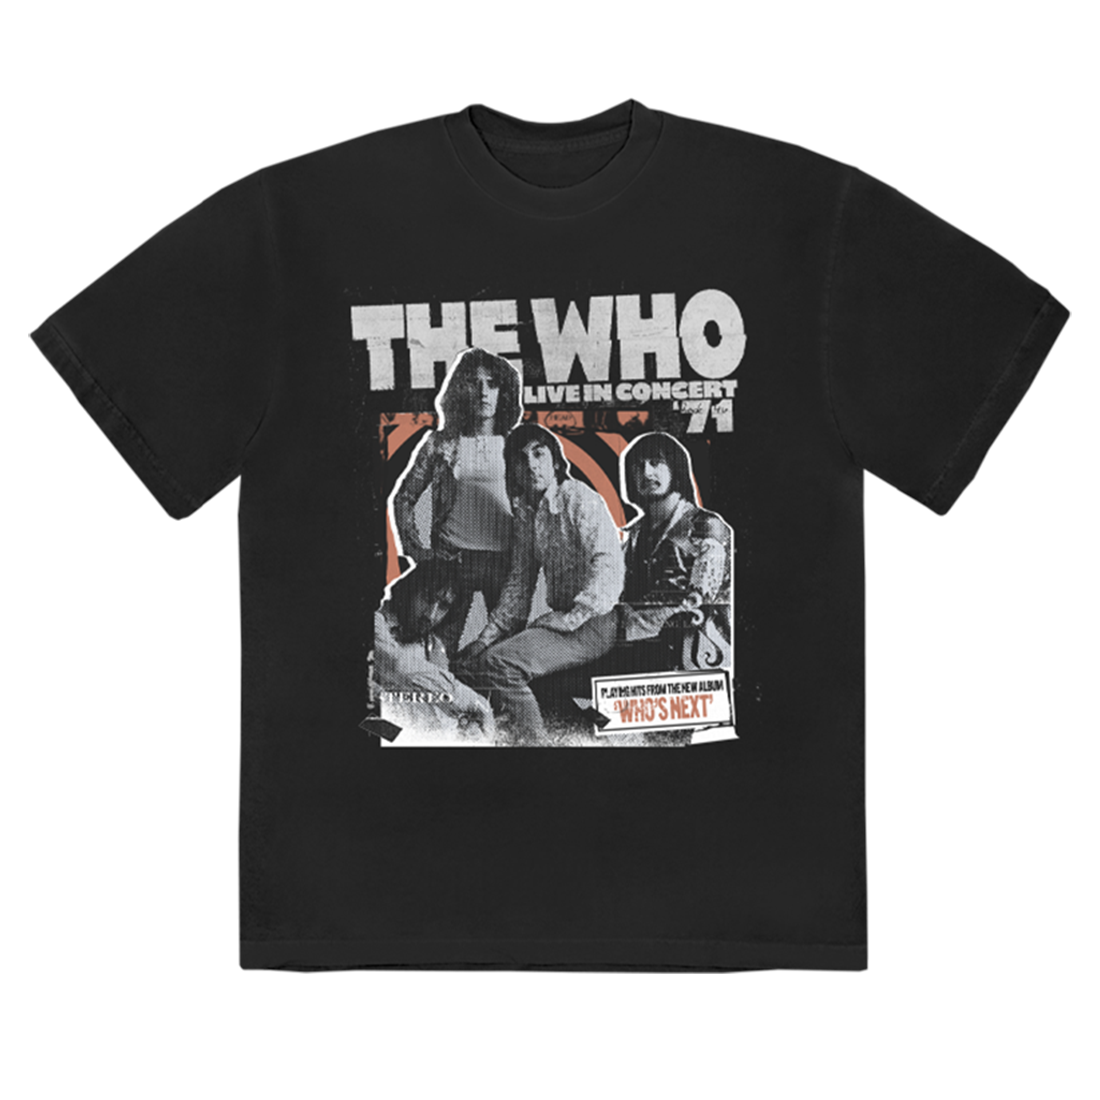 The Who - Live in Concert Black T-Shirt